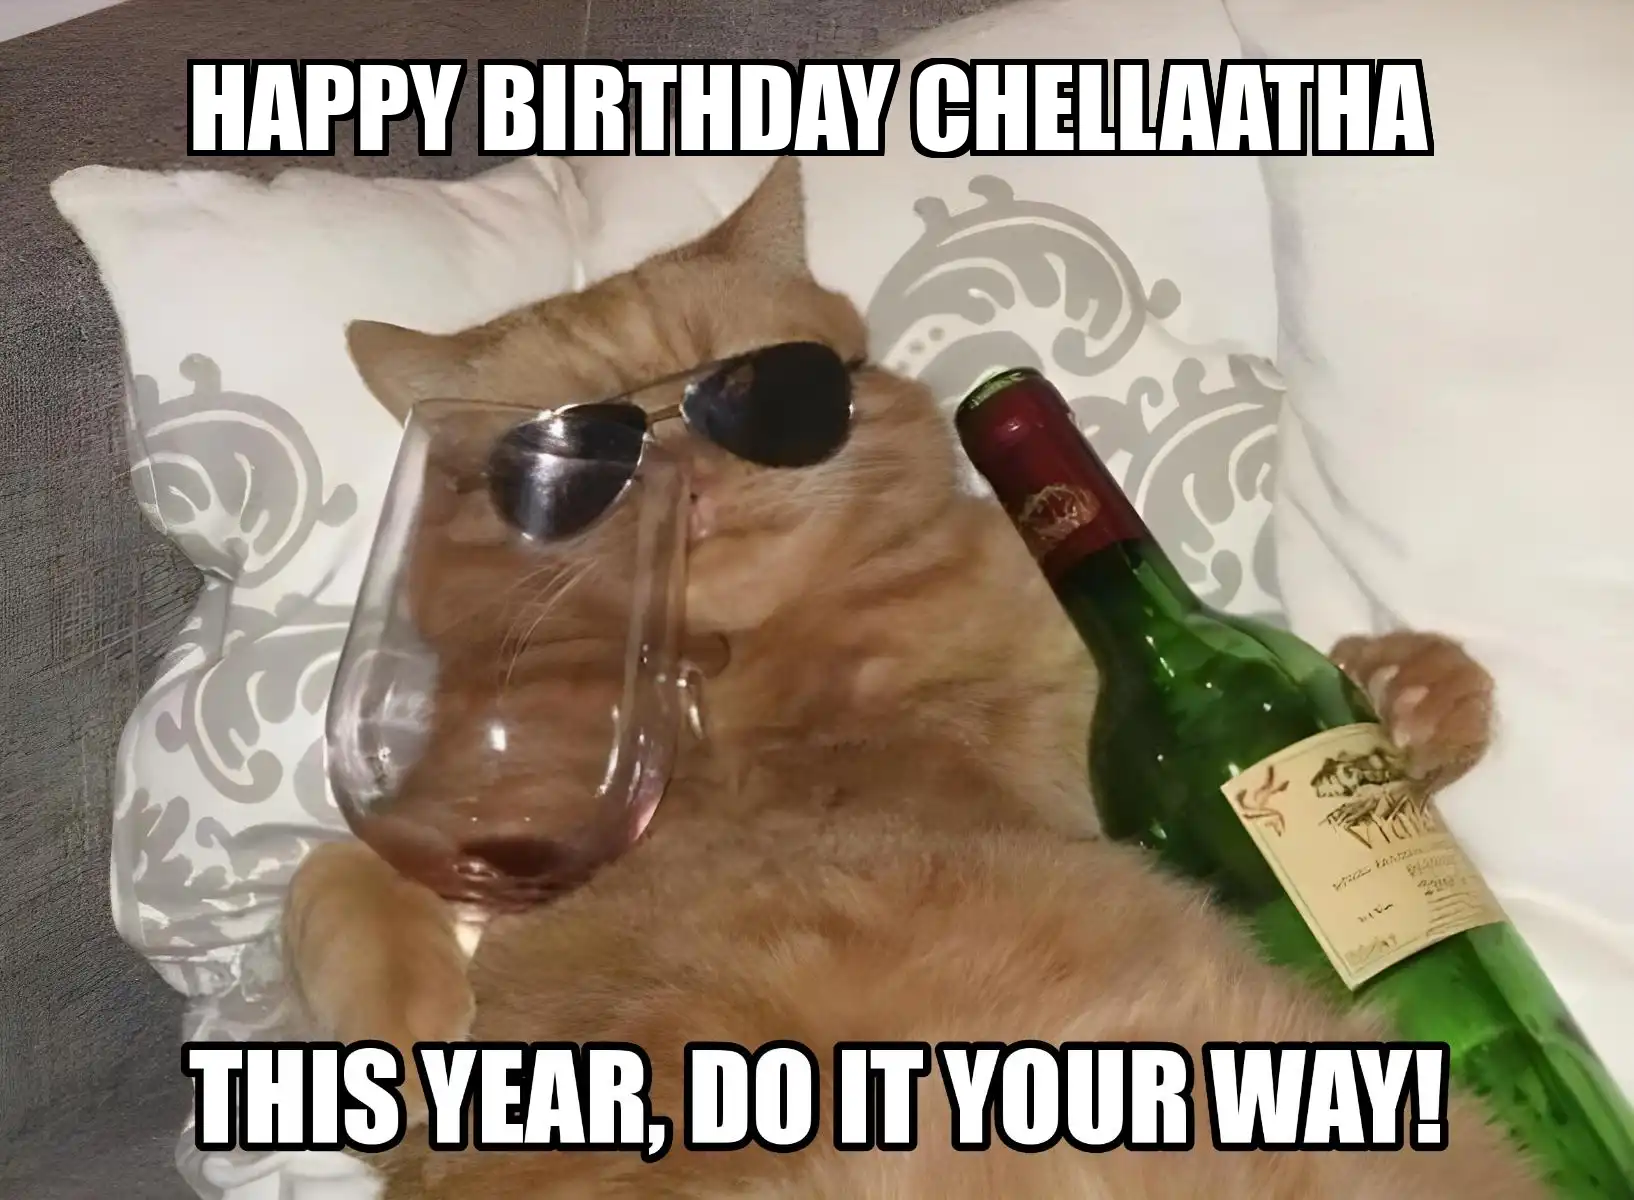 Happy Birthday Chellaatha This Year Do It Your Way Meme